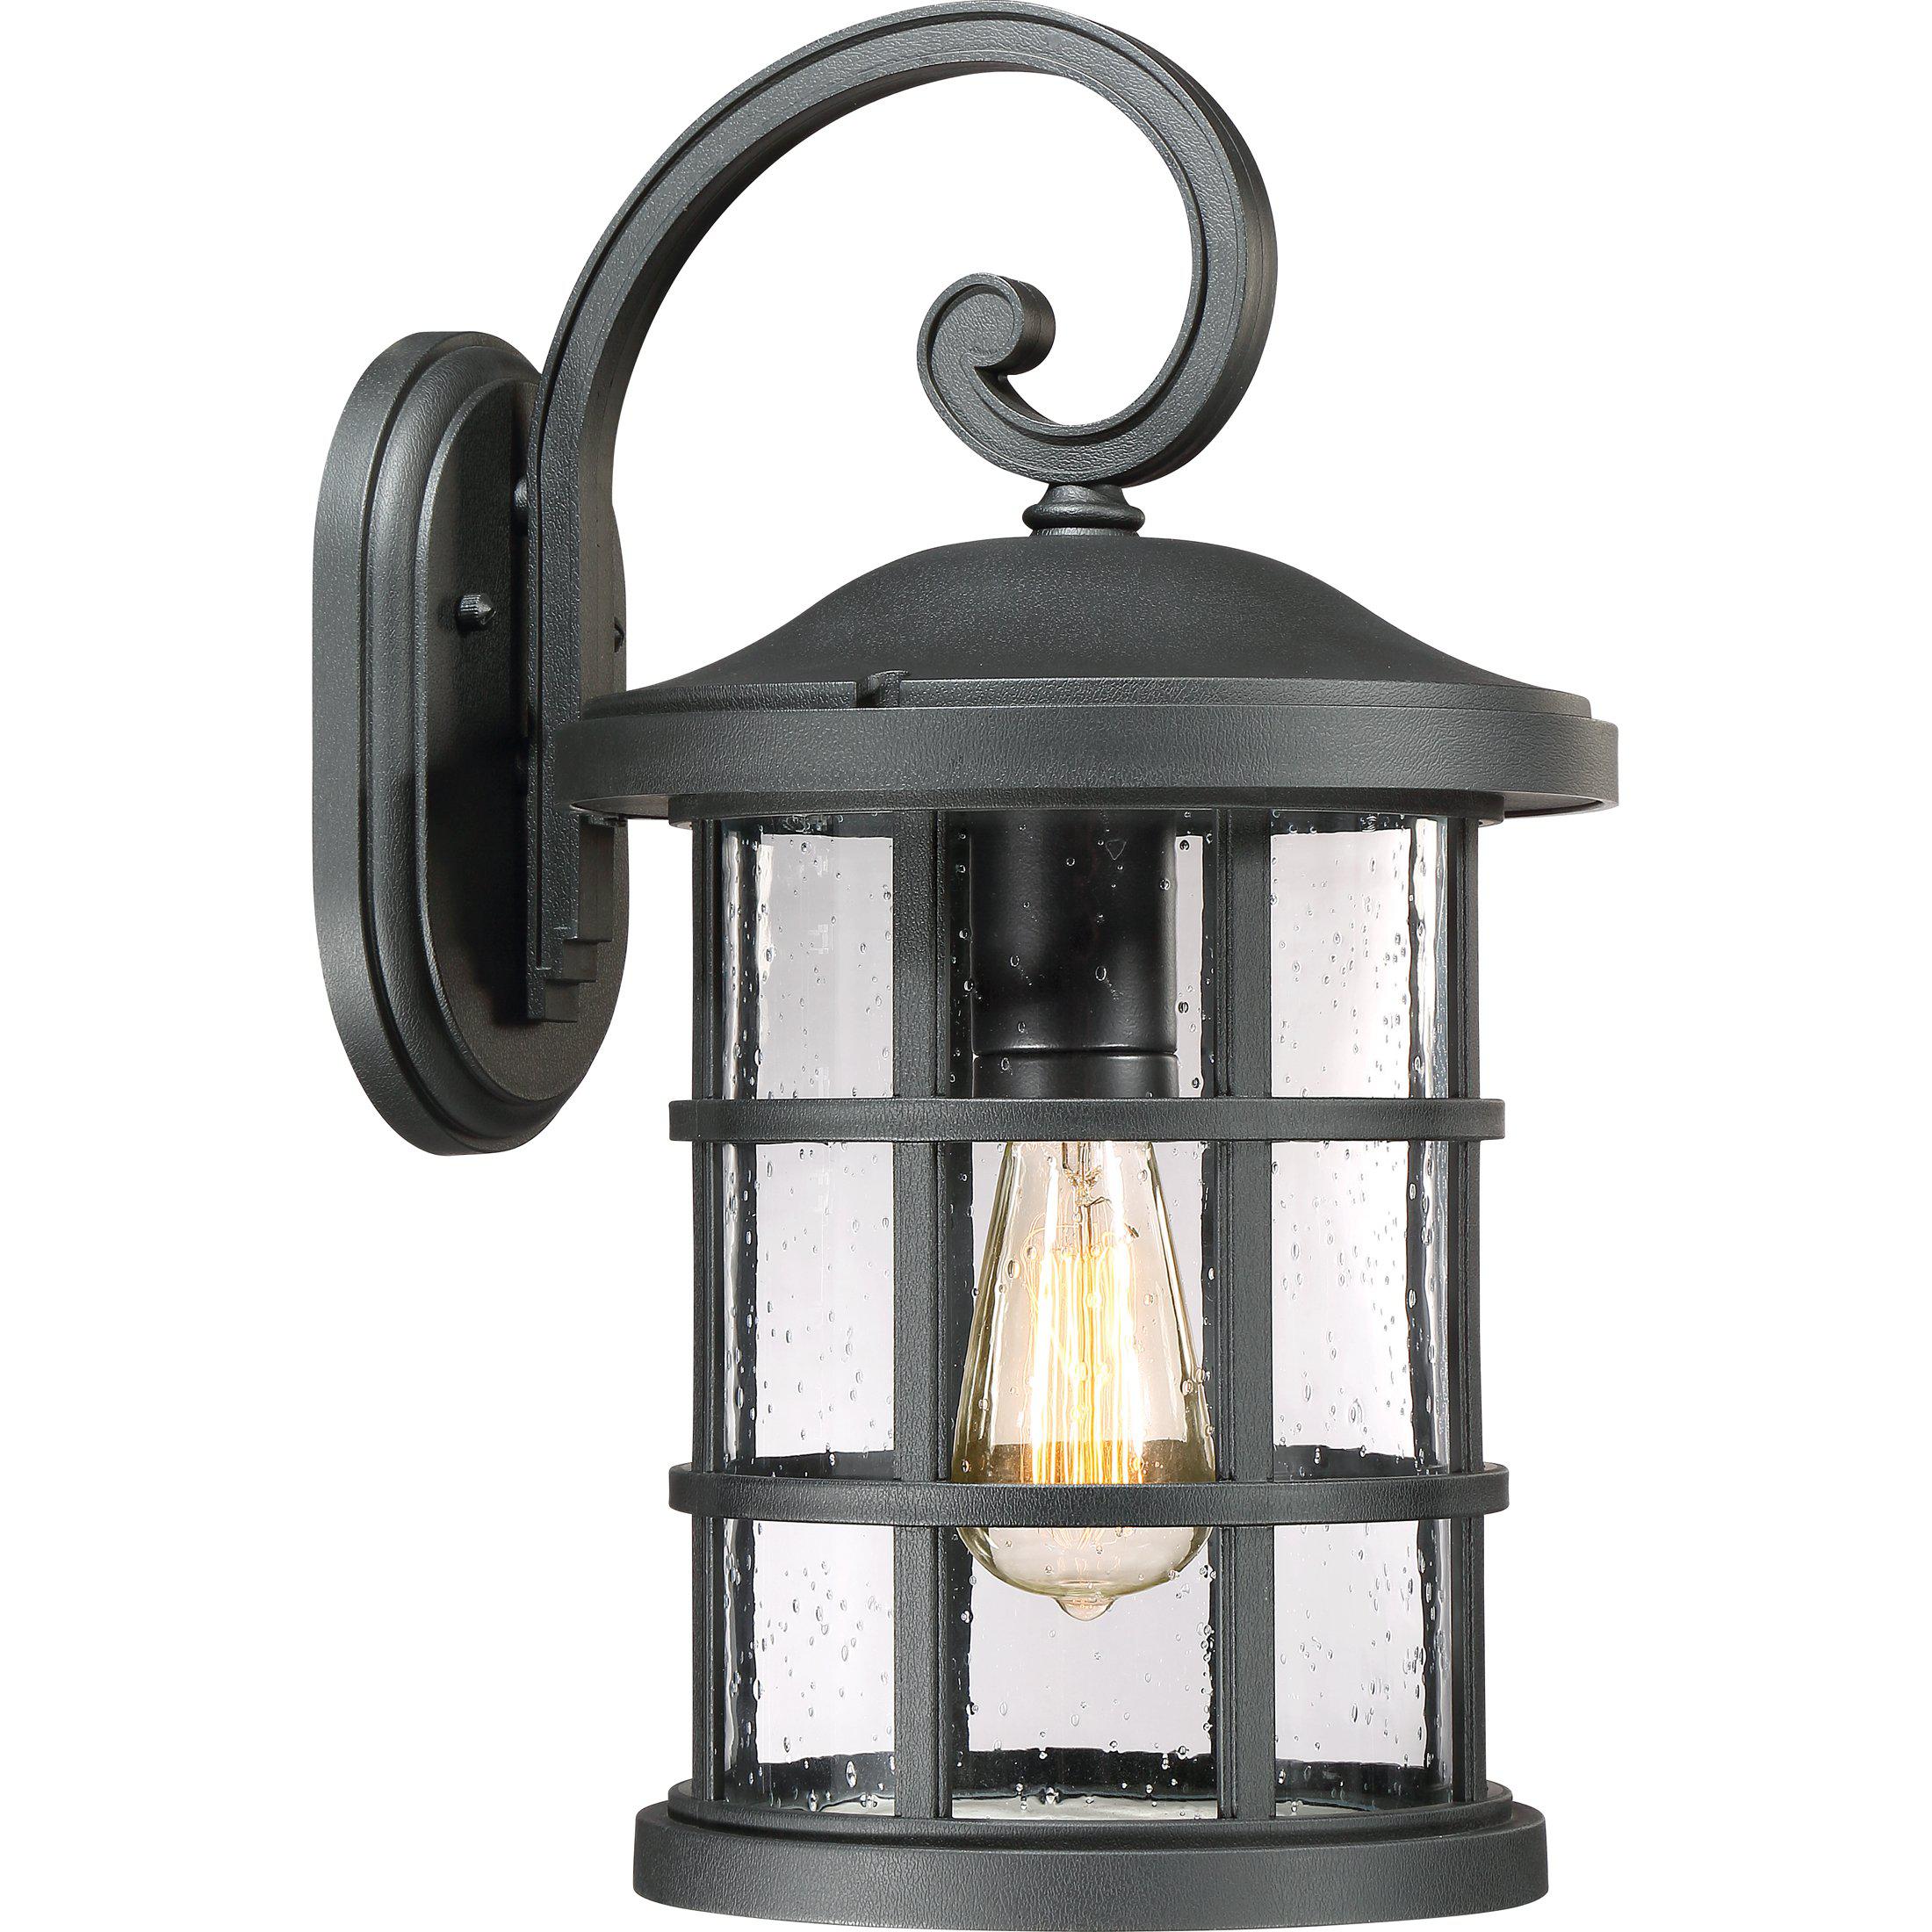 Quoizel  Crusade Outdoor Lantern, Large Outdoor l Wall Quoizel Earth Black  